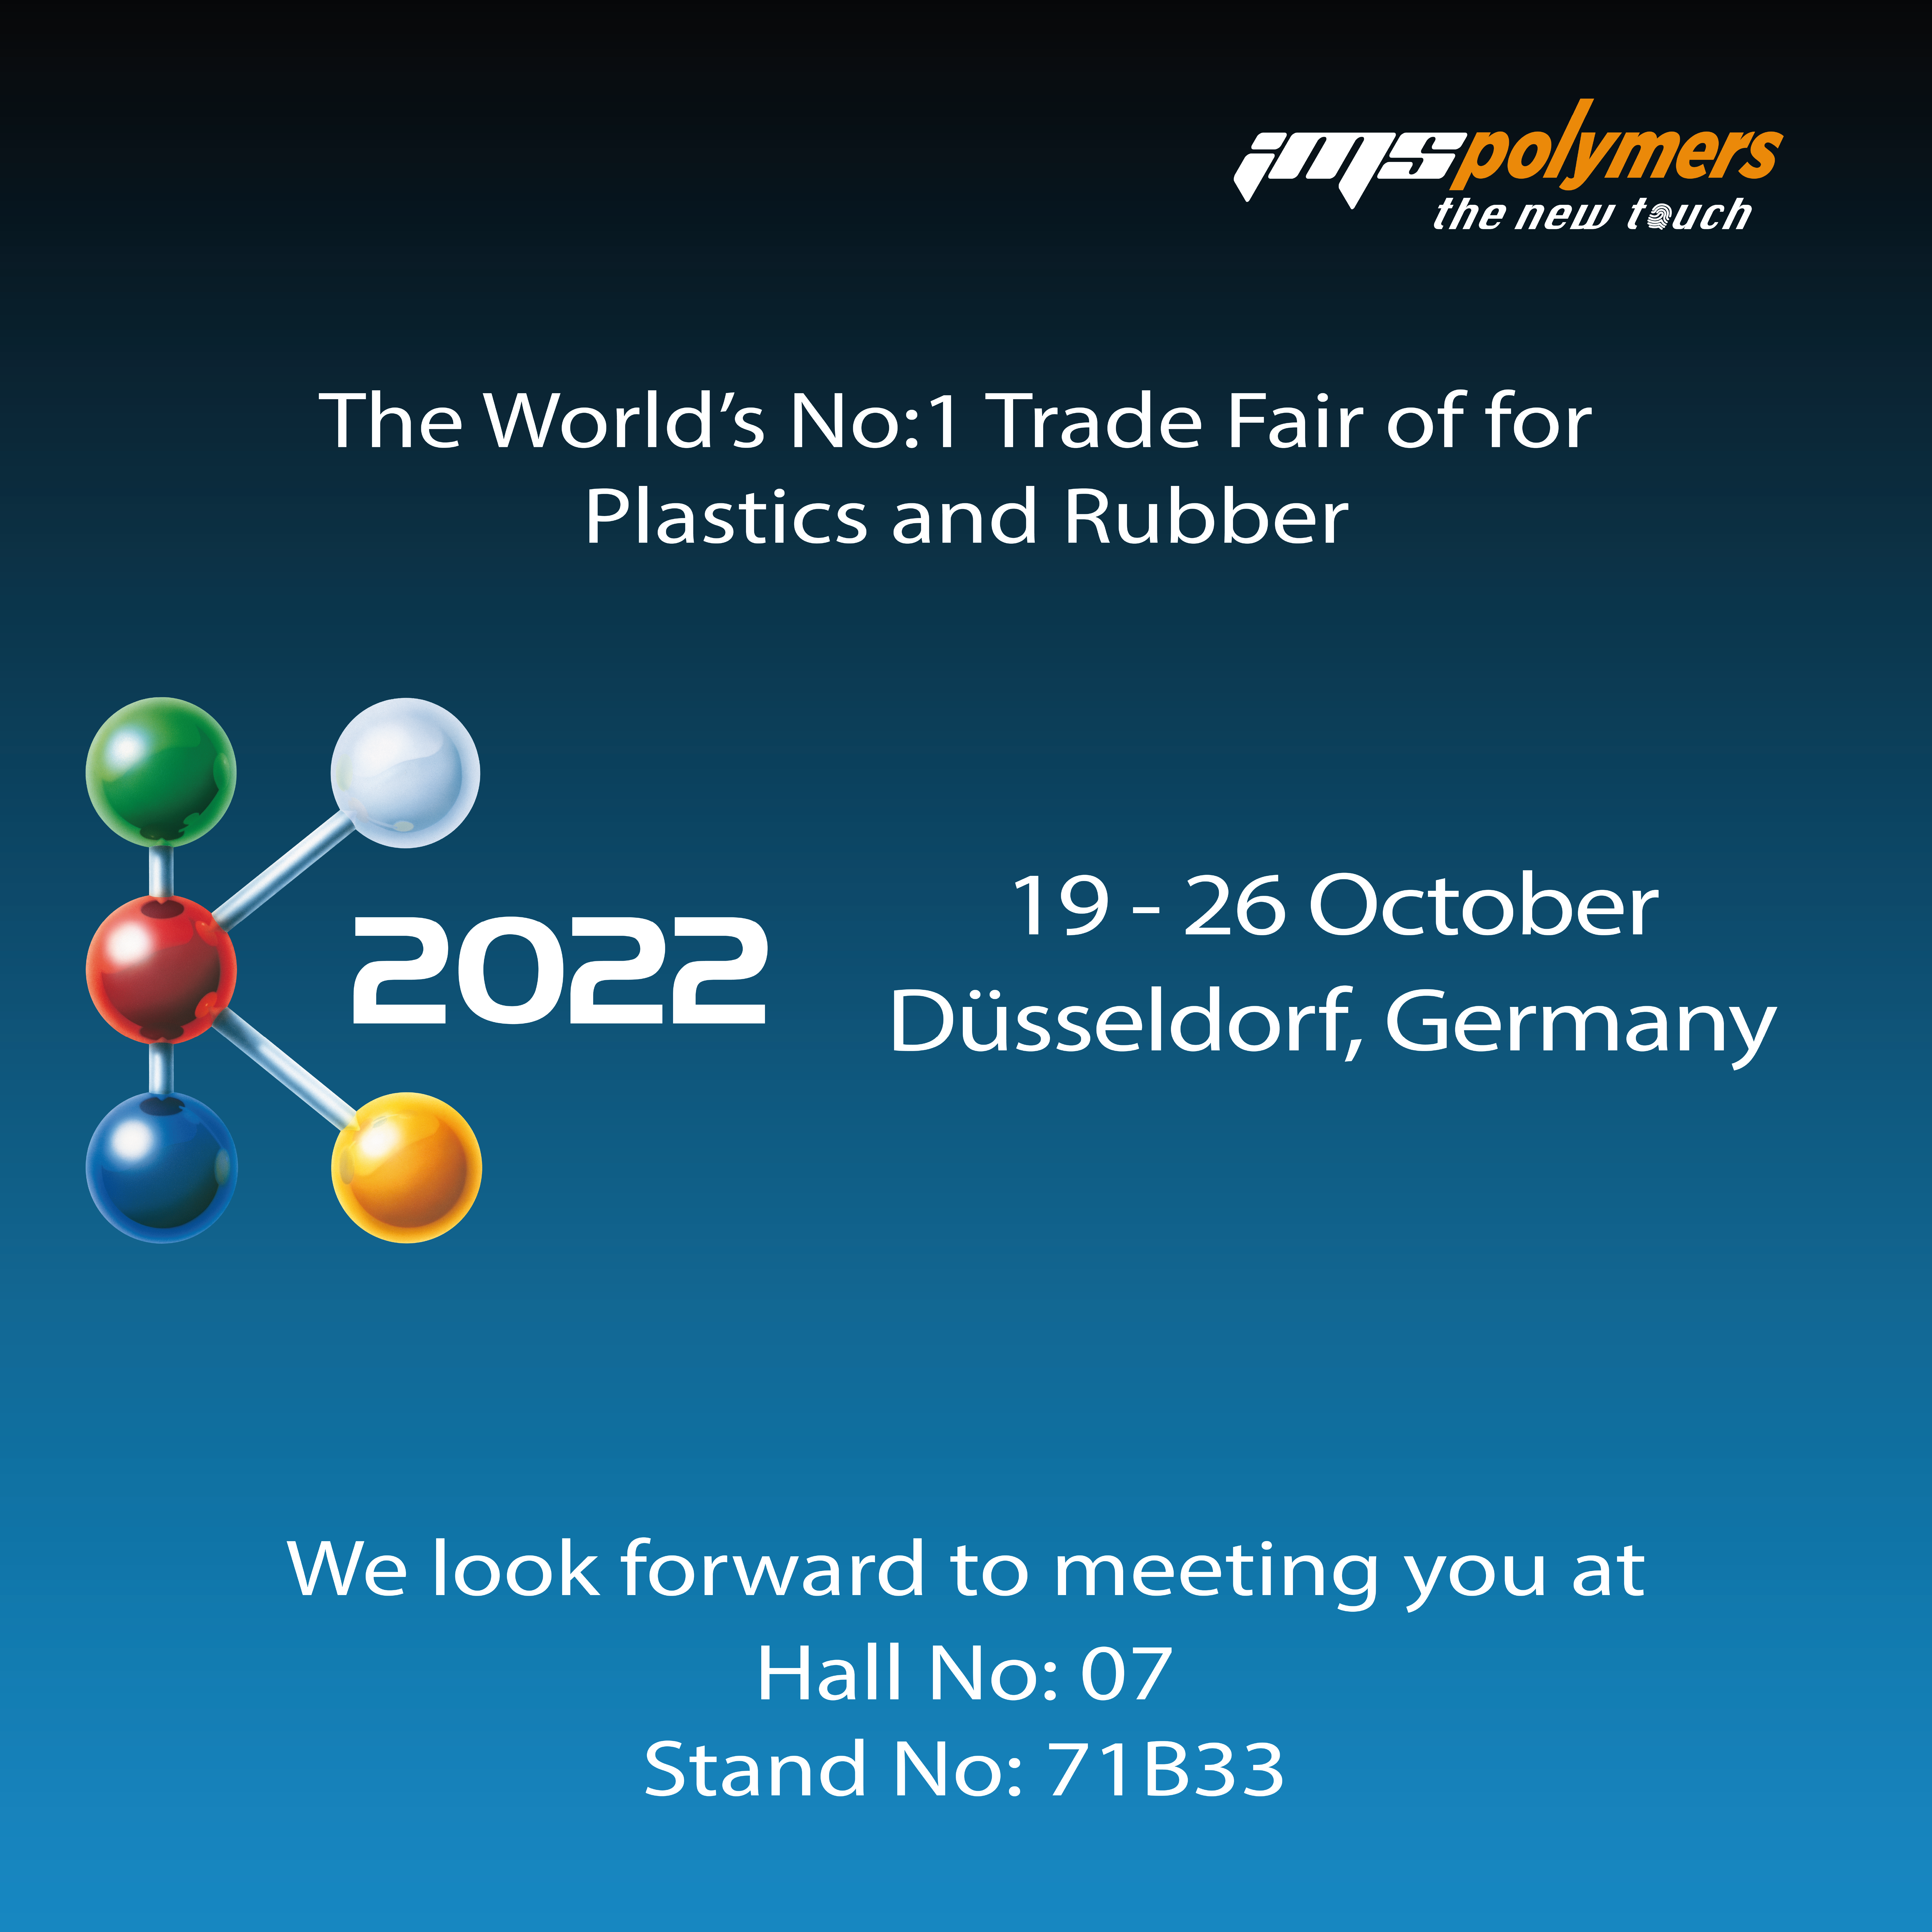 K 2022 The World's No.1 Trade Fair for Plastics and Rubber